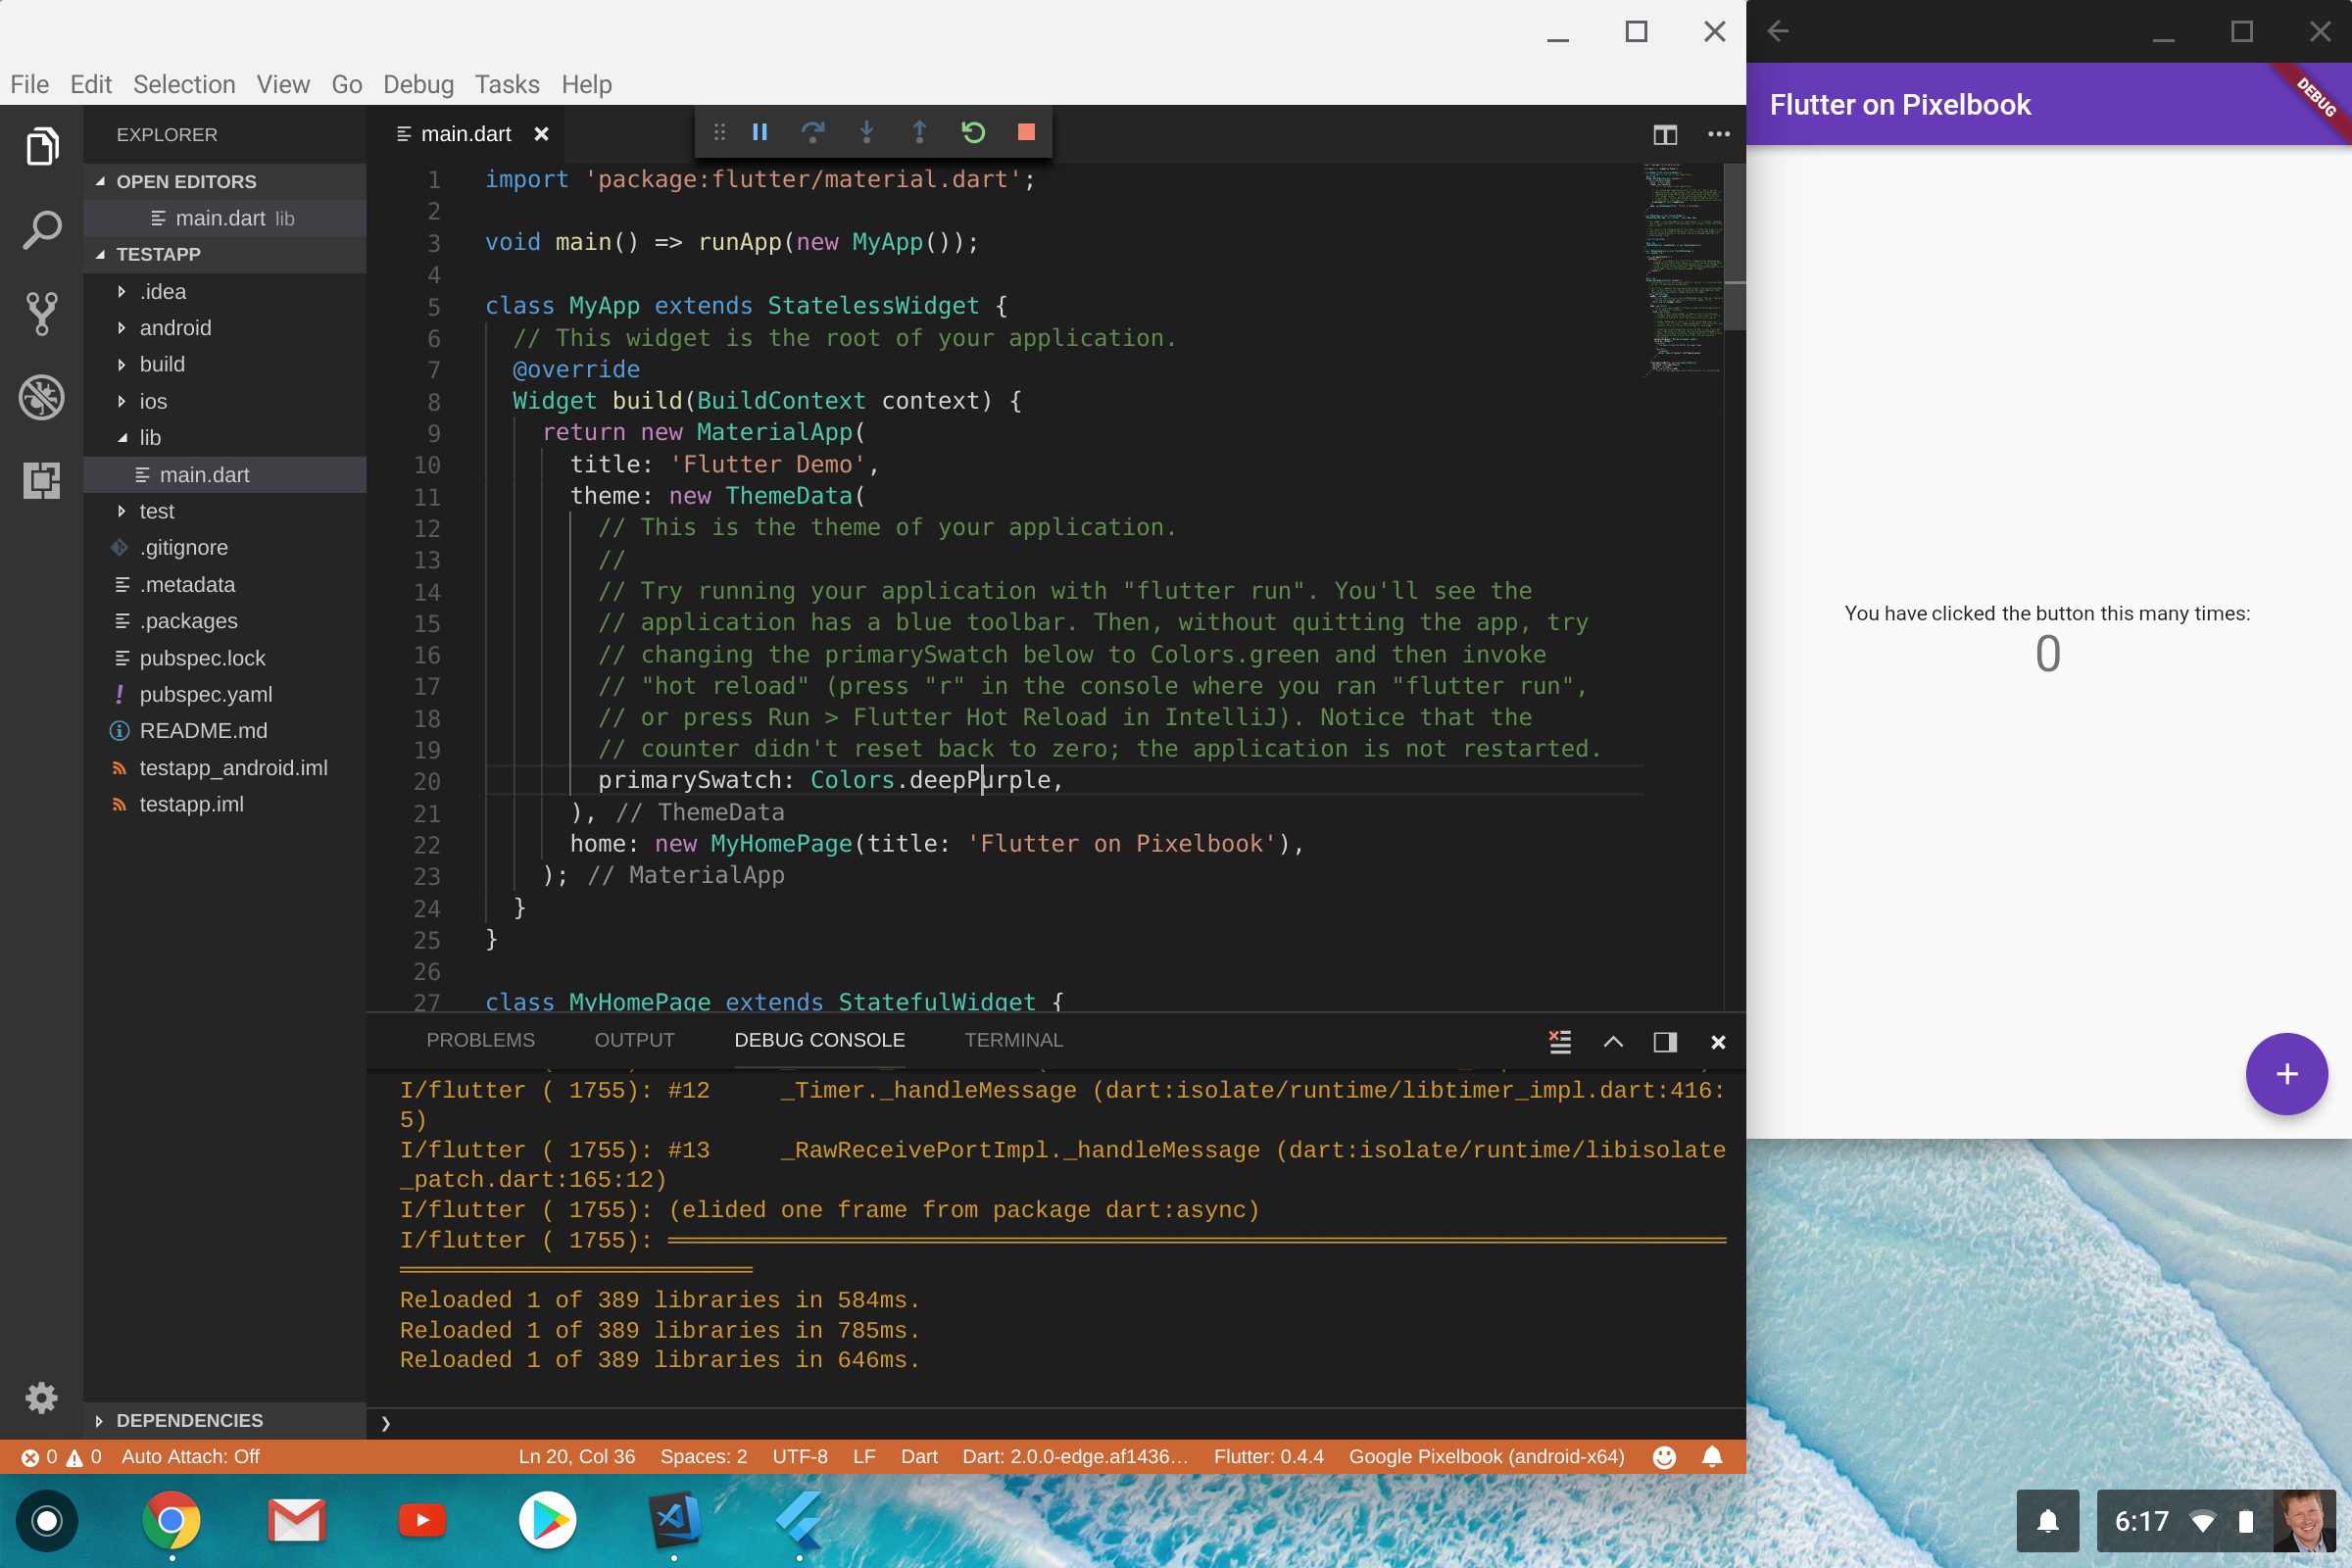 Flutter running locally on a Pixelbook, connected with hot reload to Visual Studio Code